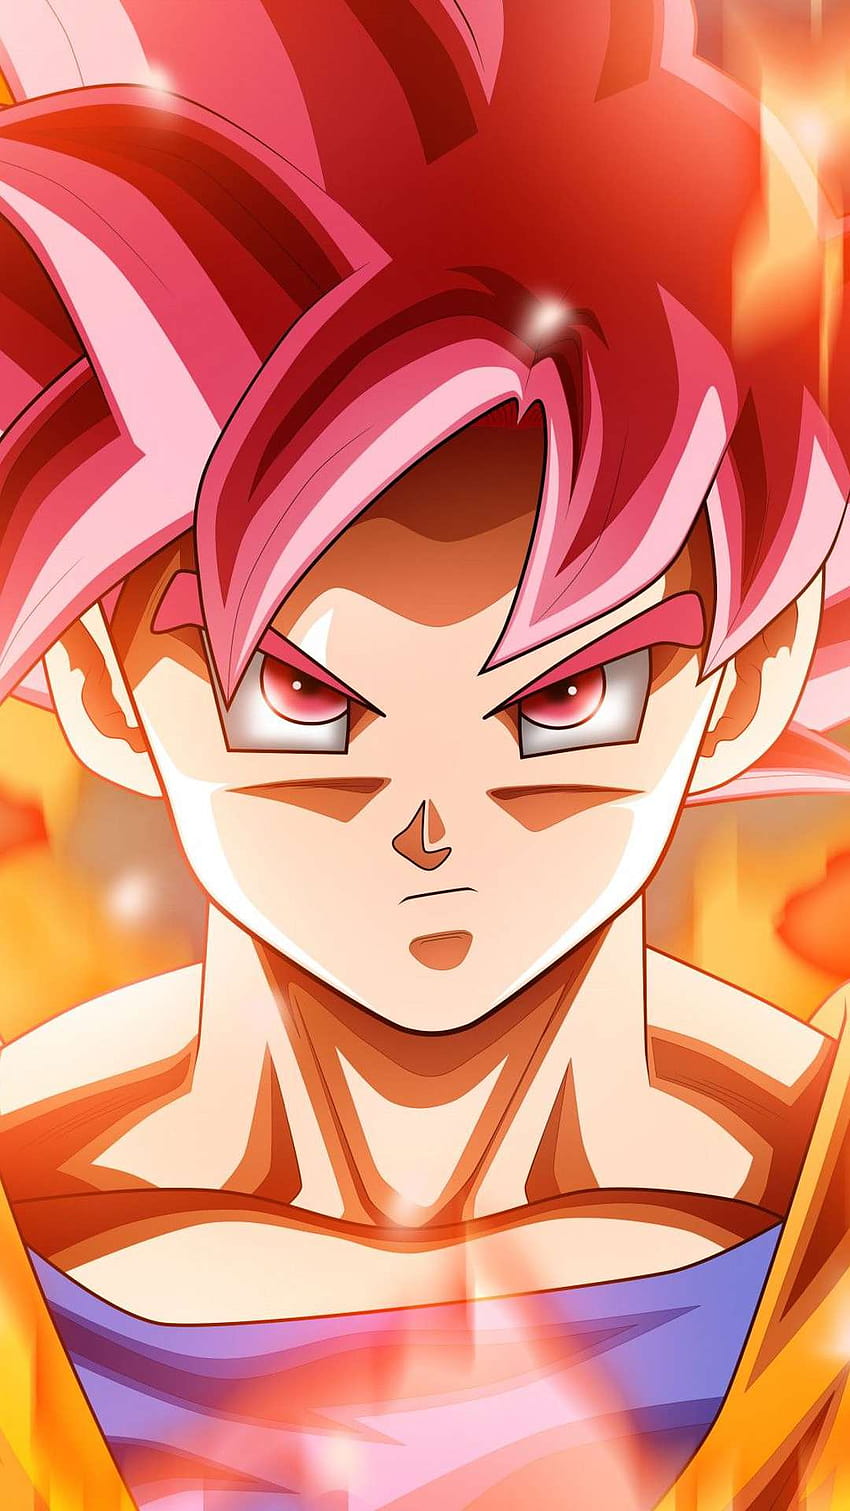 28 Goku for iPhone and Android by Paul Weber, goku mui kaioken HD phone wallpaper